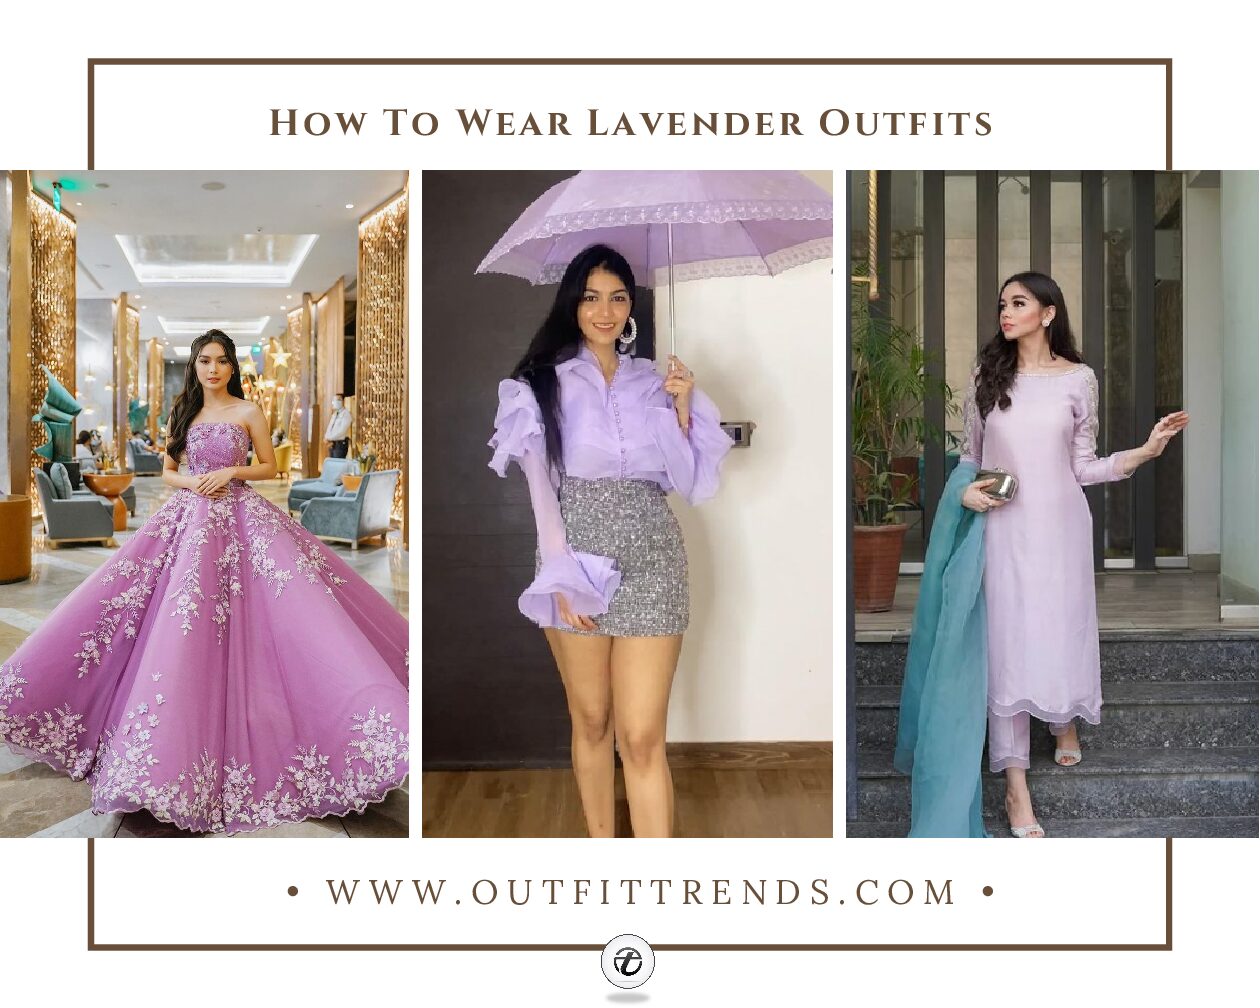 How To Wear Lavender - 22 Lavender Outfit Ideas We're Loving